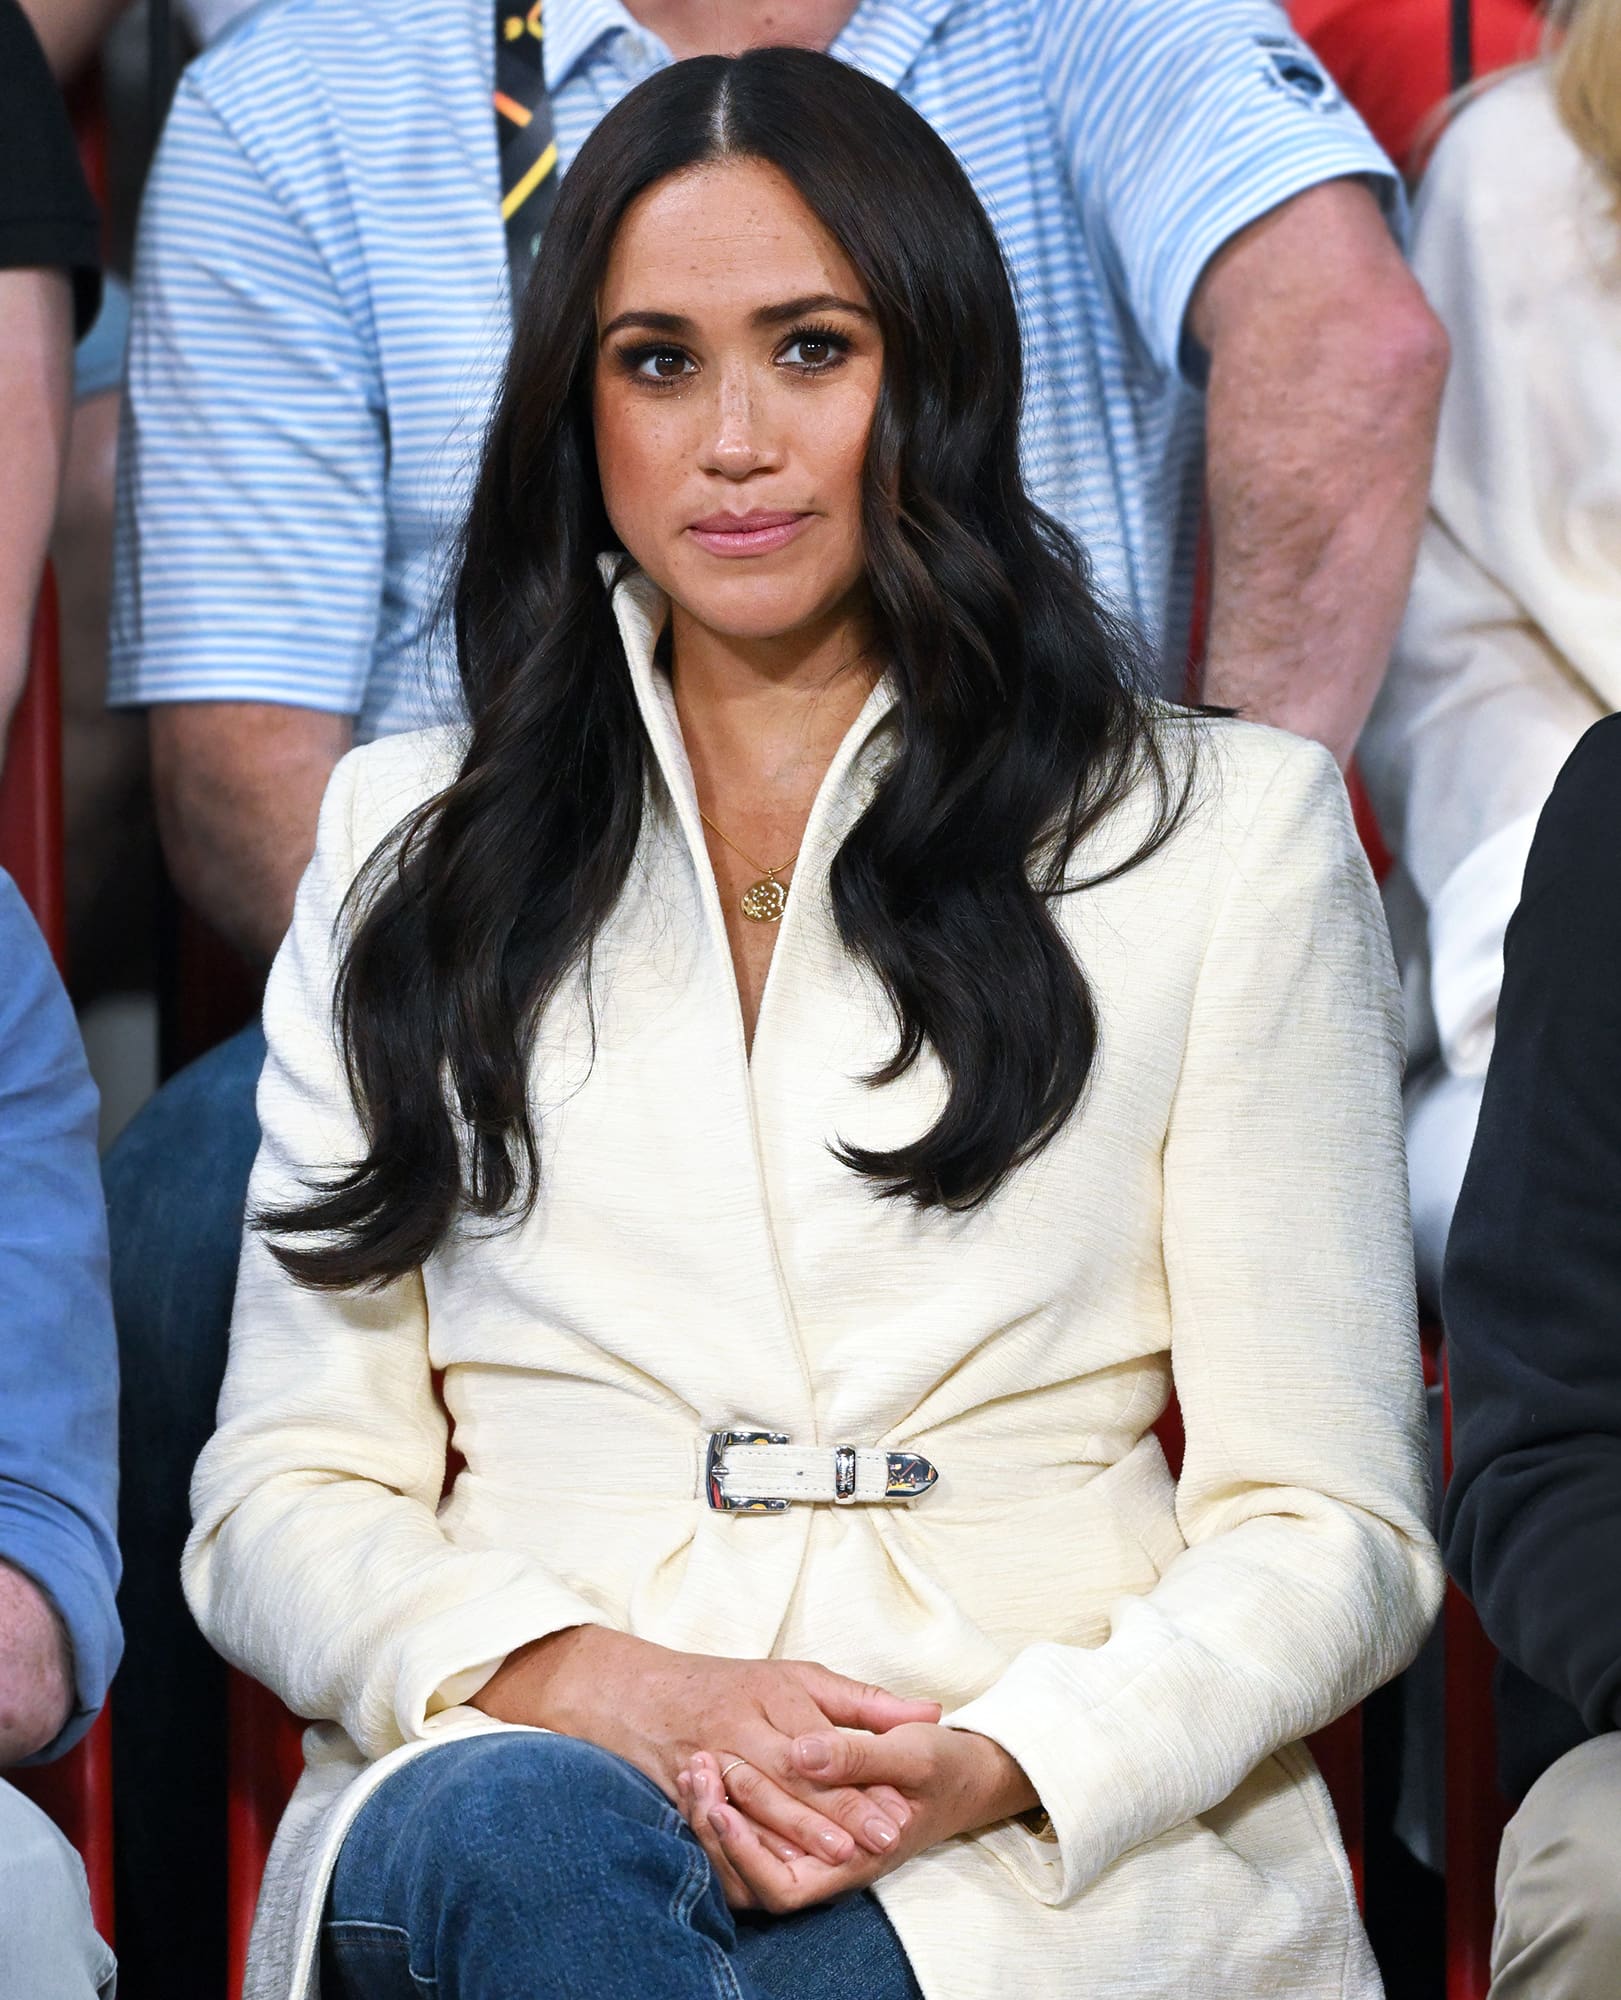 Meghan Markle Has Accused Victoria Beckham Of Leaking Terrible Stories About Her To The Public